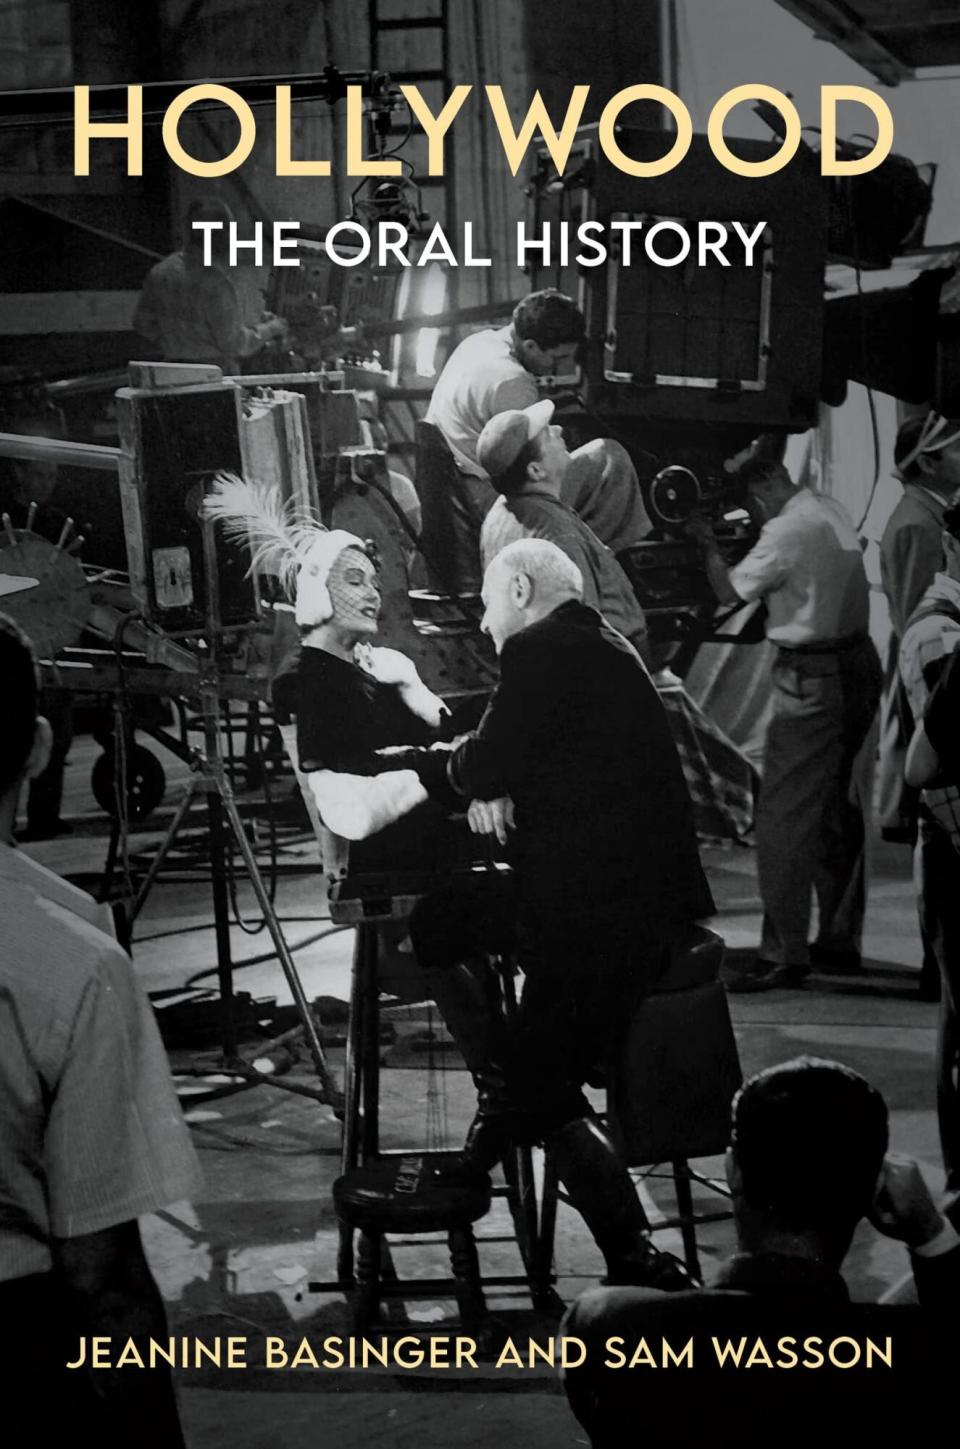 Hollywood: The Oral History by Jeanine Basinger and Sam Wasson